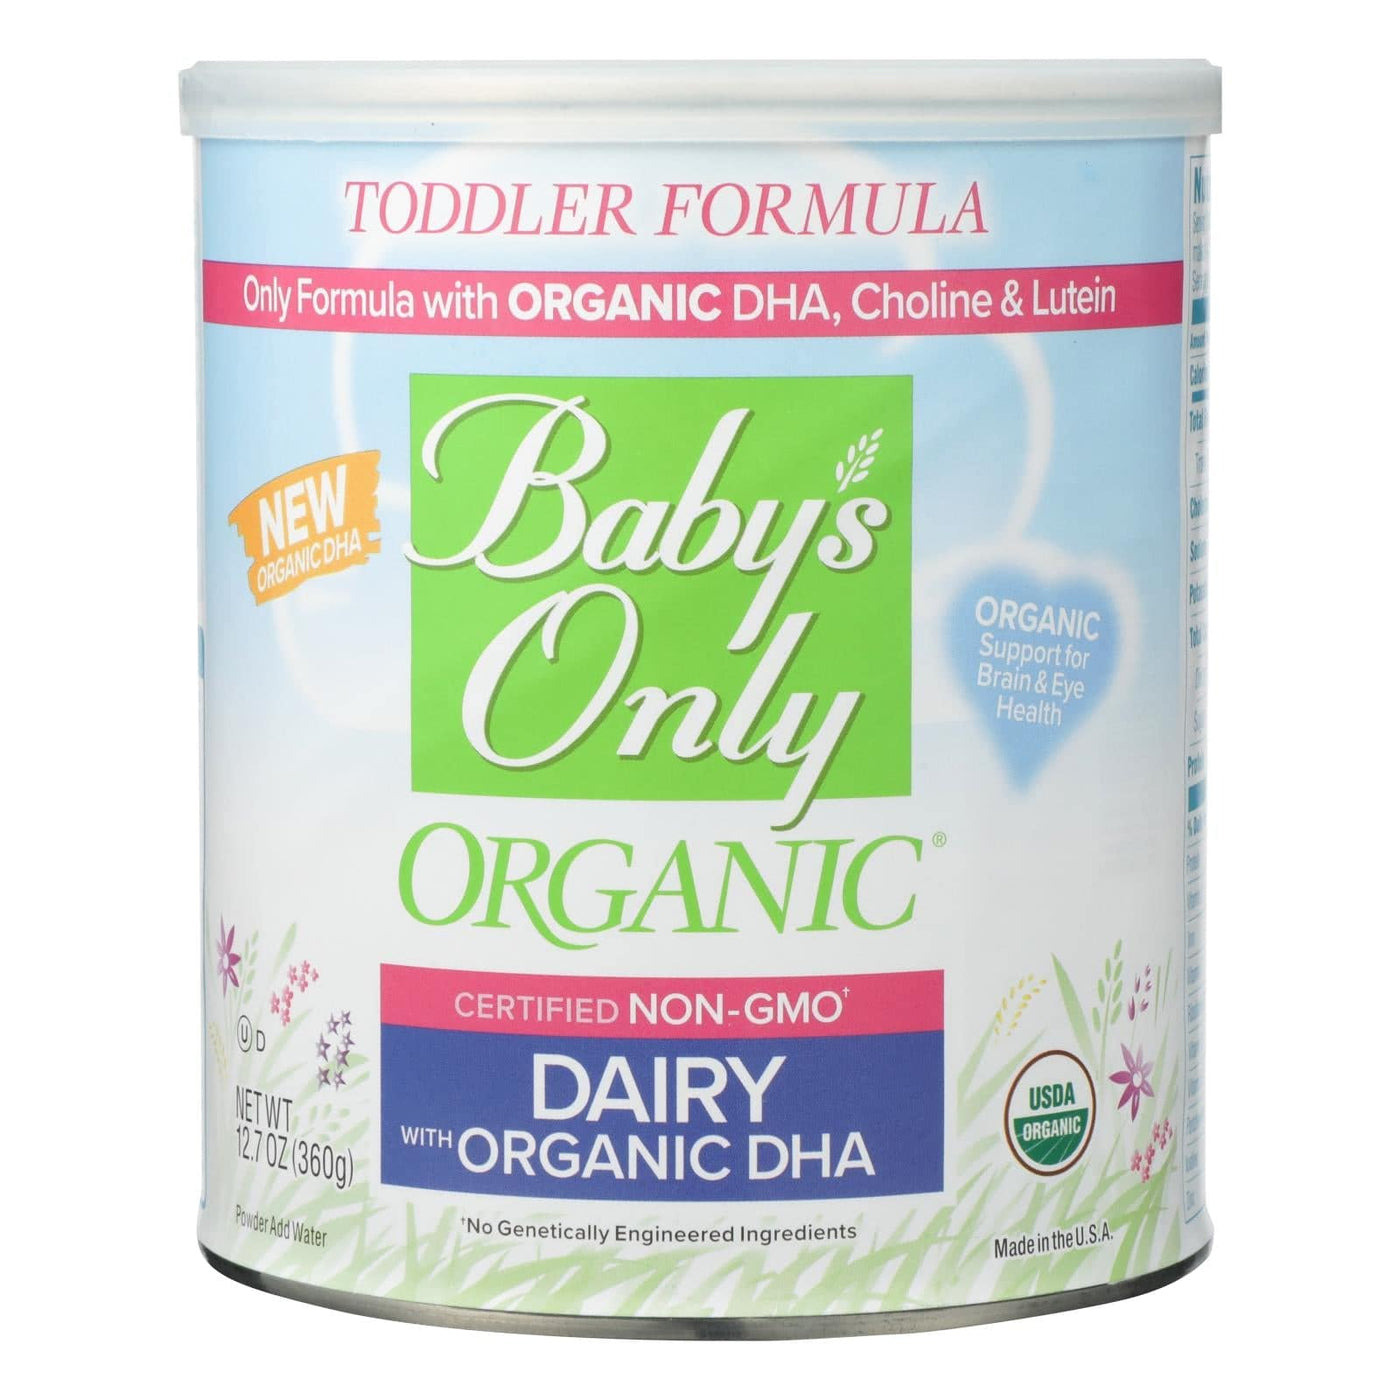 Babys Only Organic Toddler Formula - Organic - Dairy - Dha And Ara - 12.7 Oz - Case Of 6 | OnlyNaturals.us